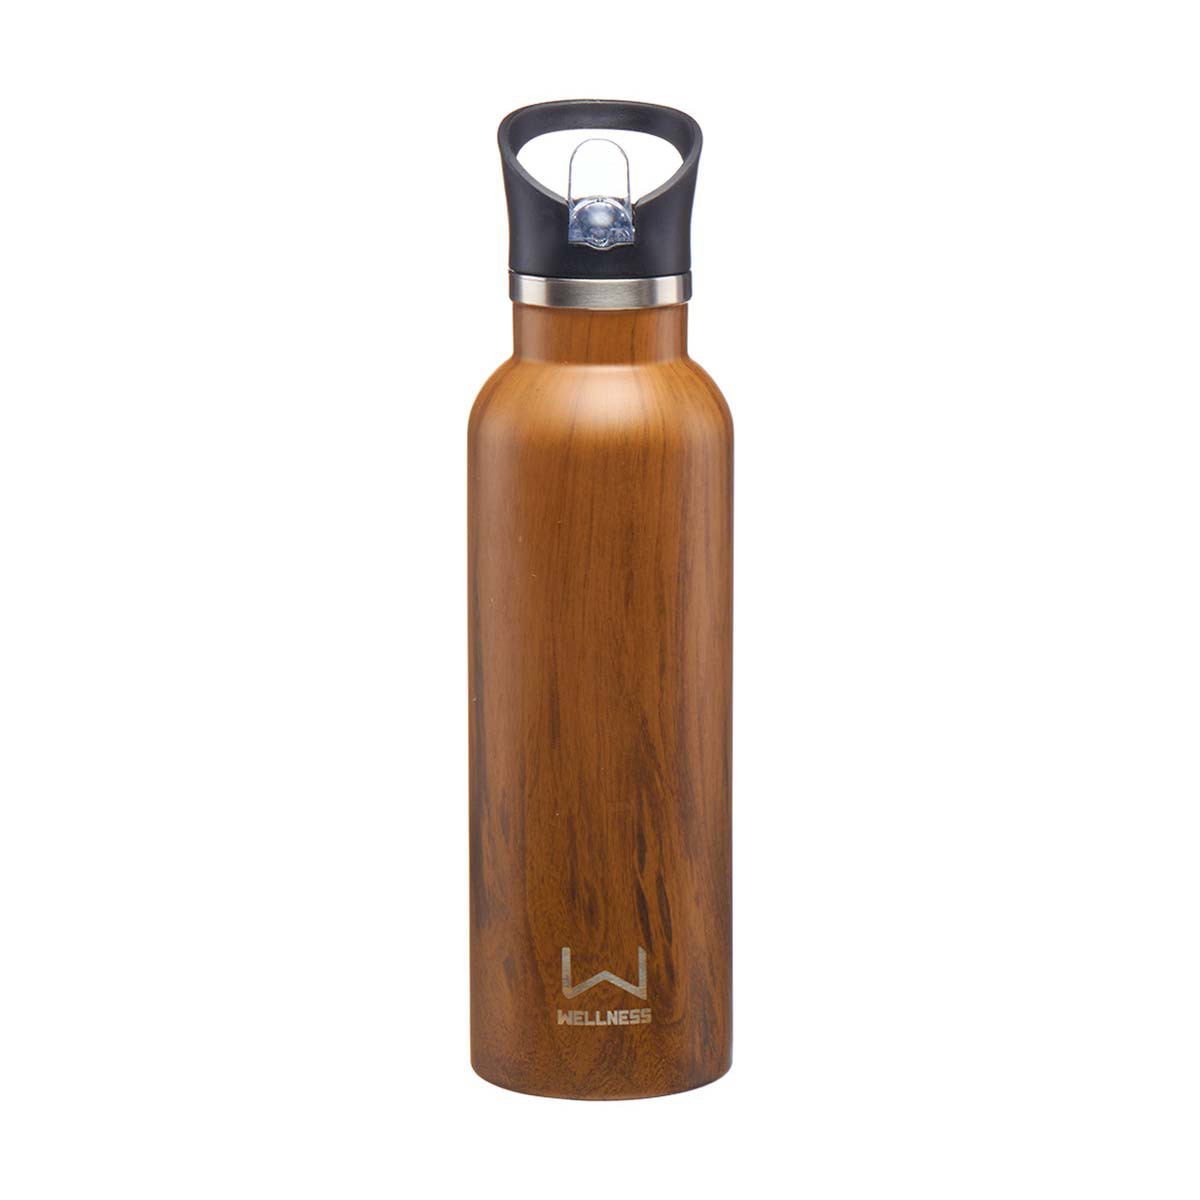 Wood Sauna Water Bottle by The Bubble Wraps